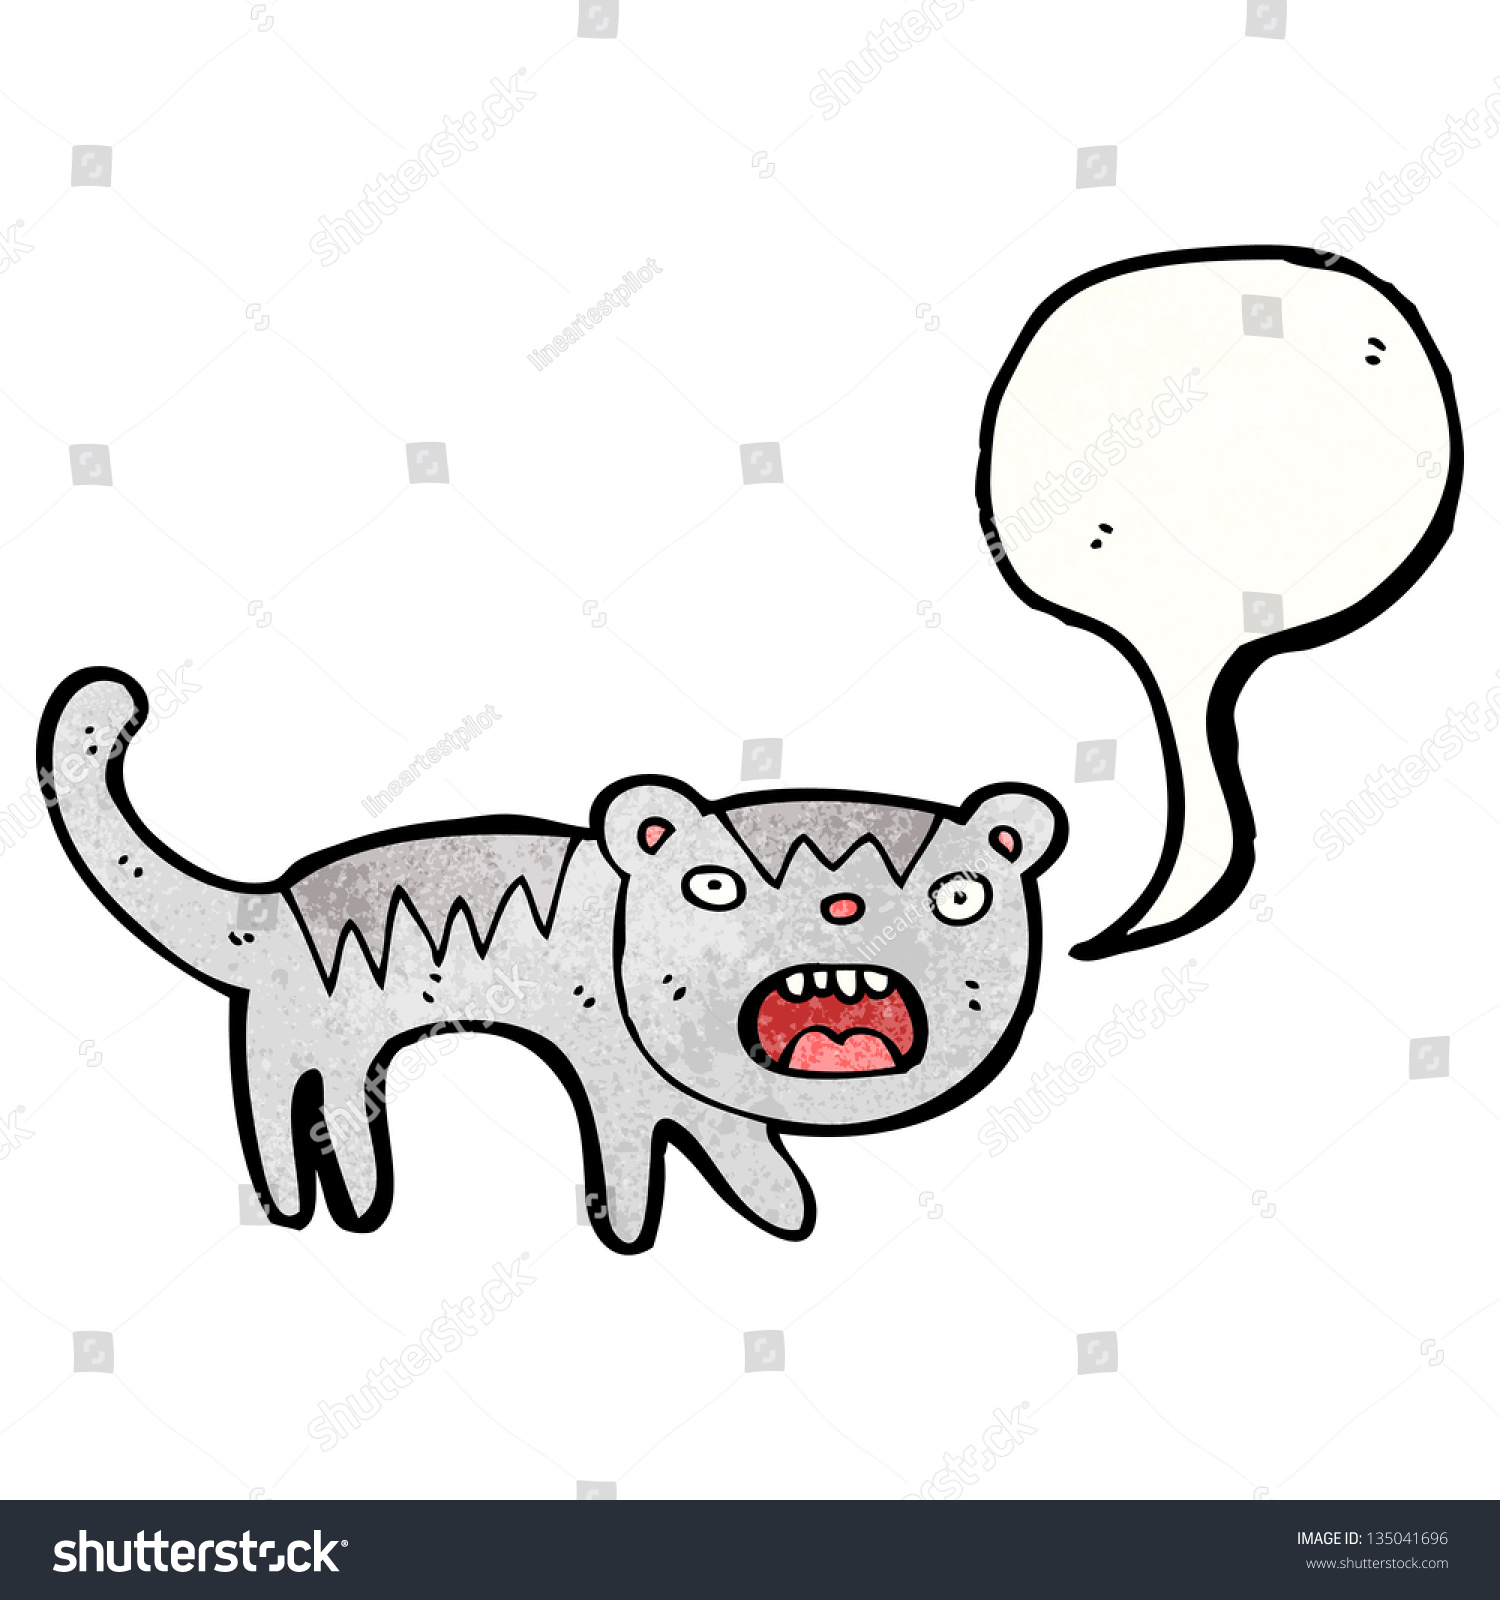 cat meow clipart - photo #27